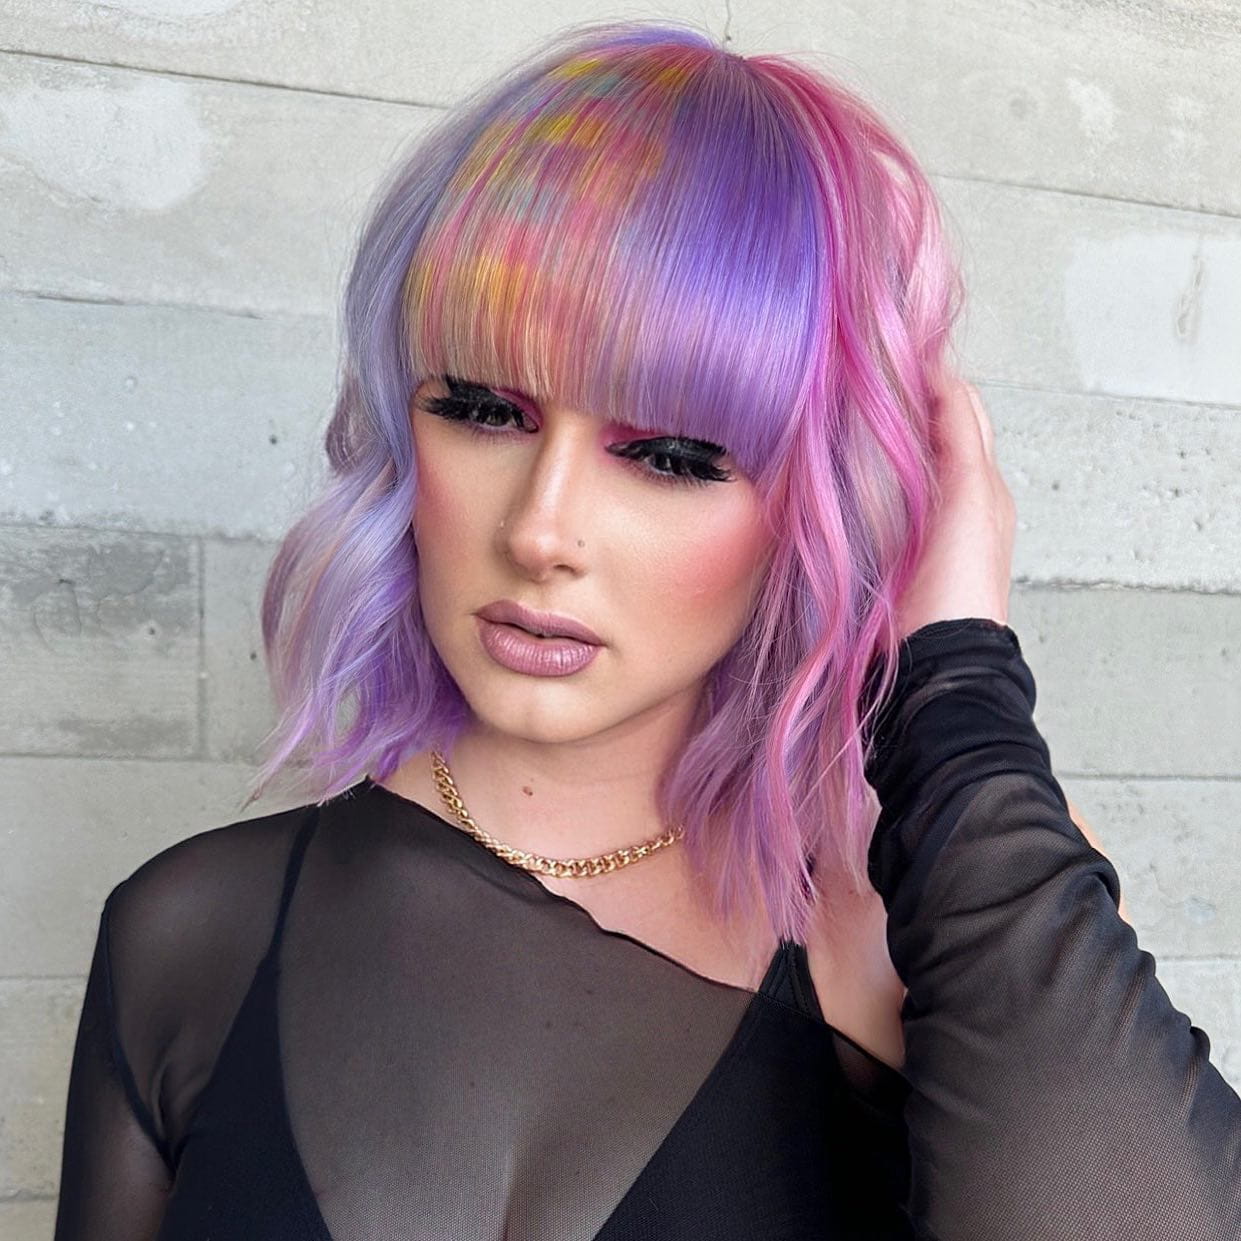 100+ Best Colorful Hair Ideas images 24